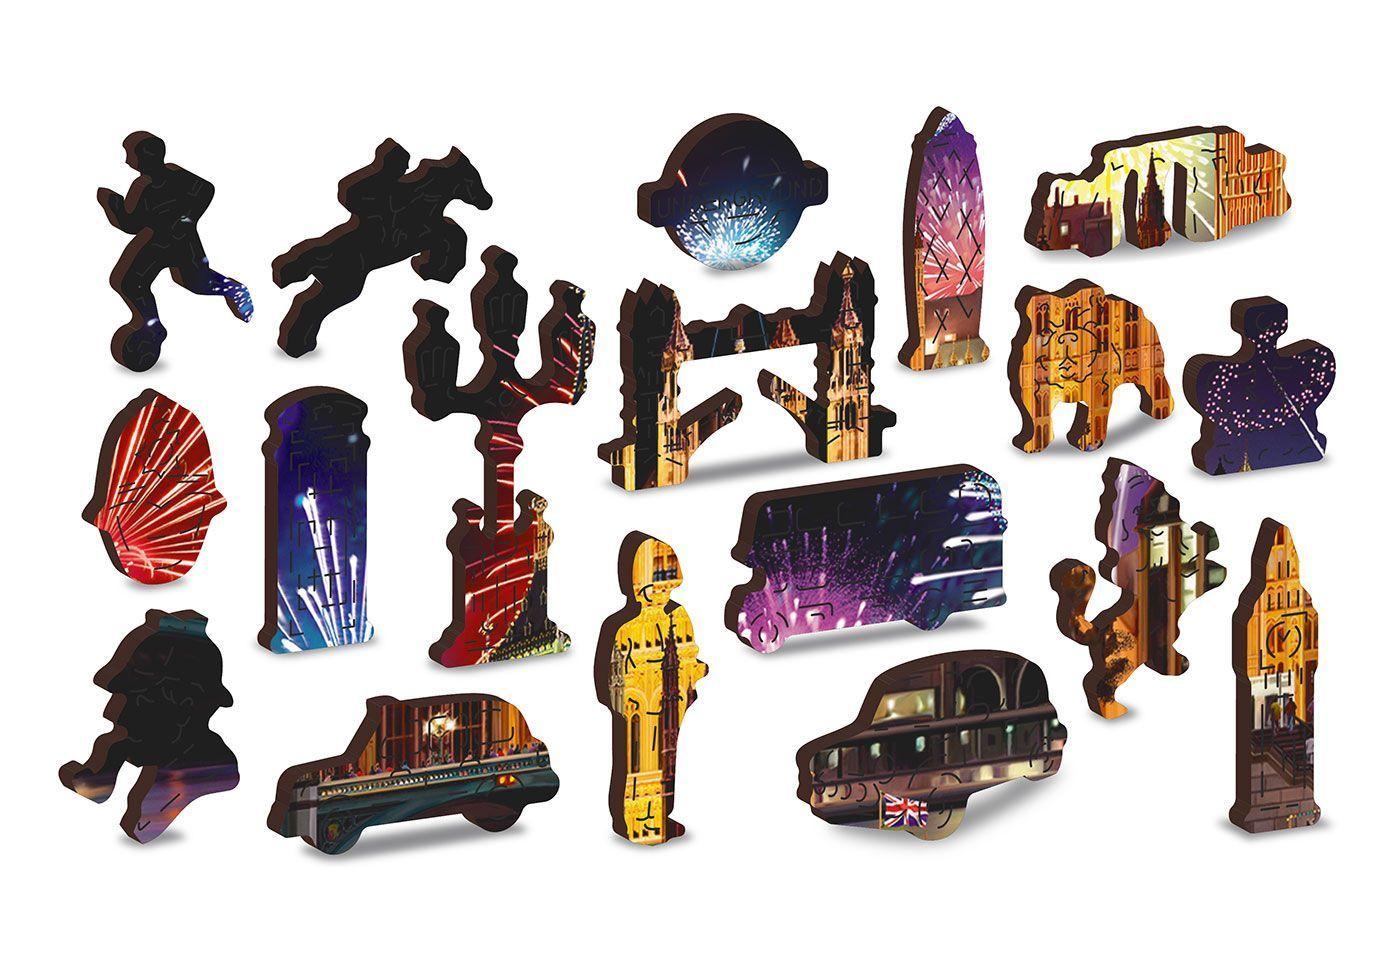 Wooden Puzzle with Figurines - London by Night M 150 pieces